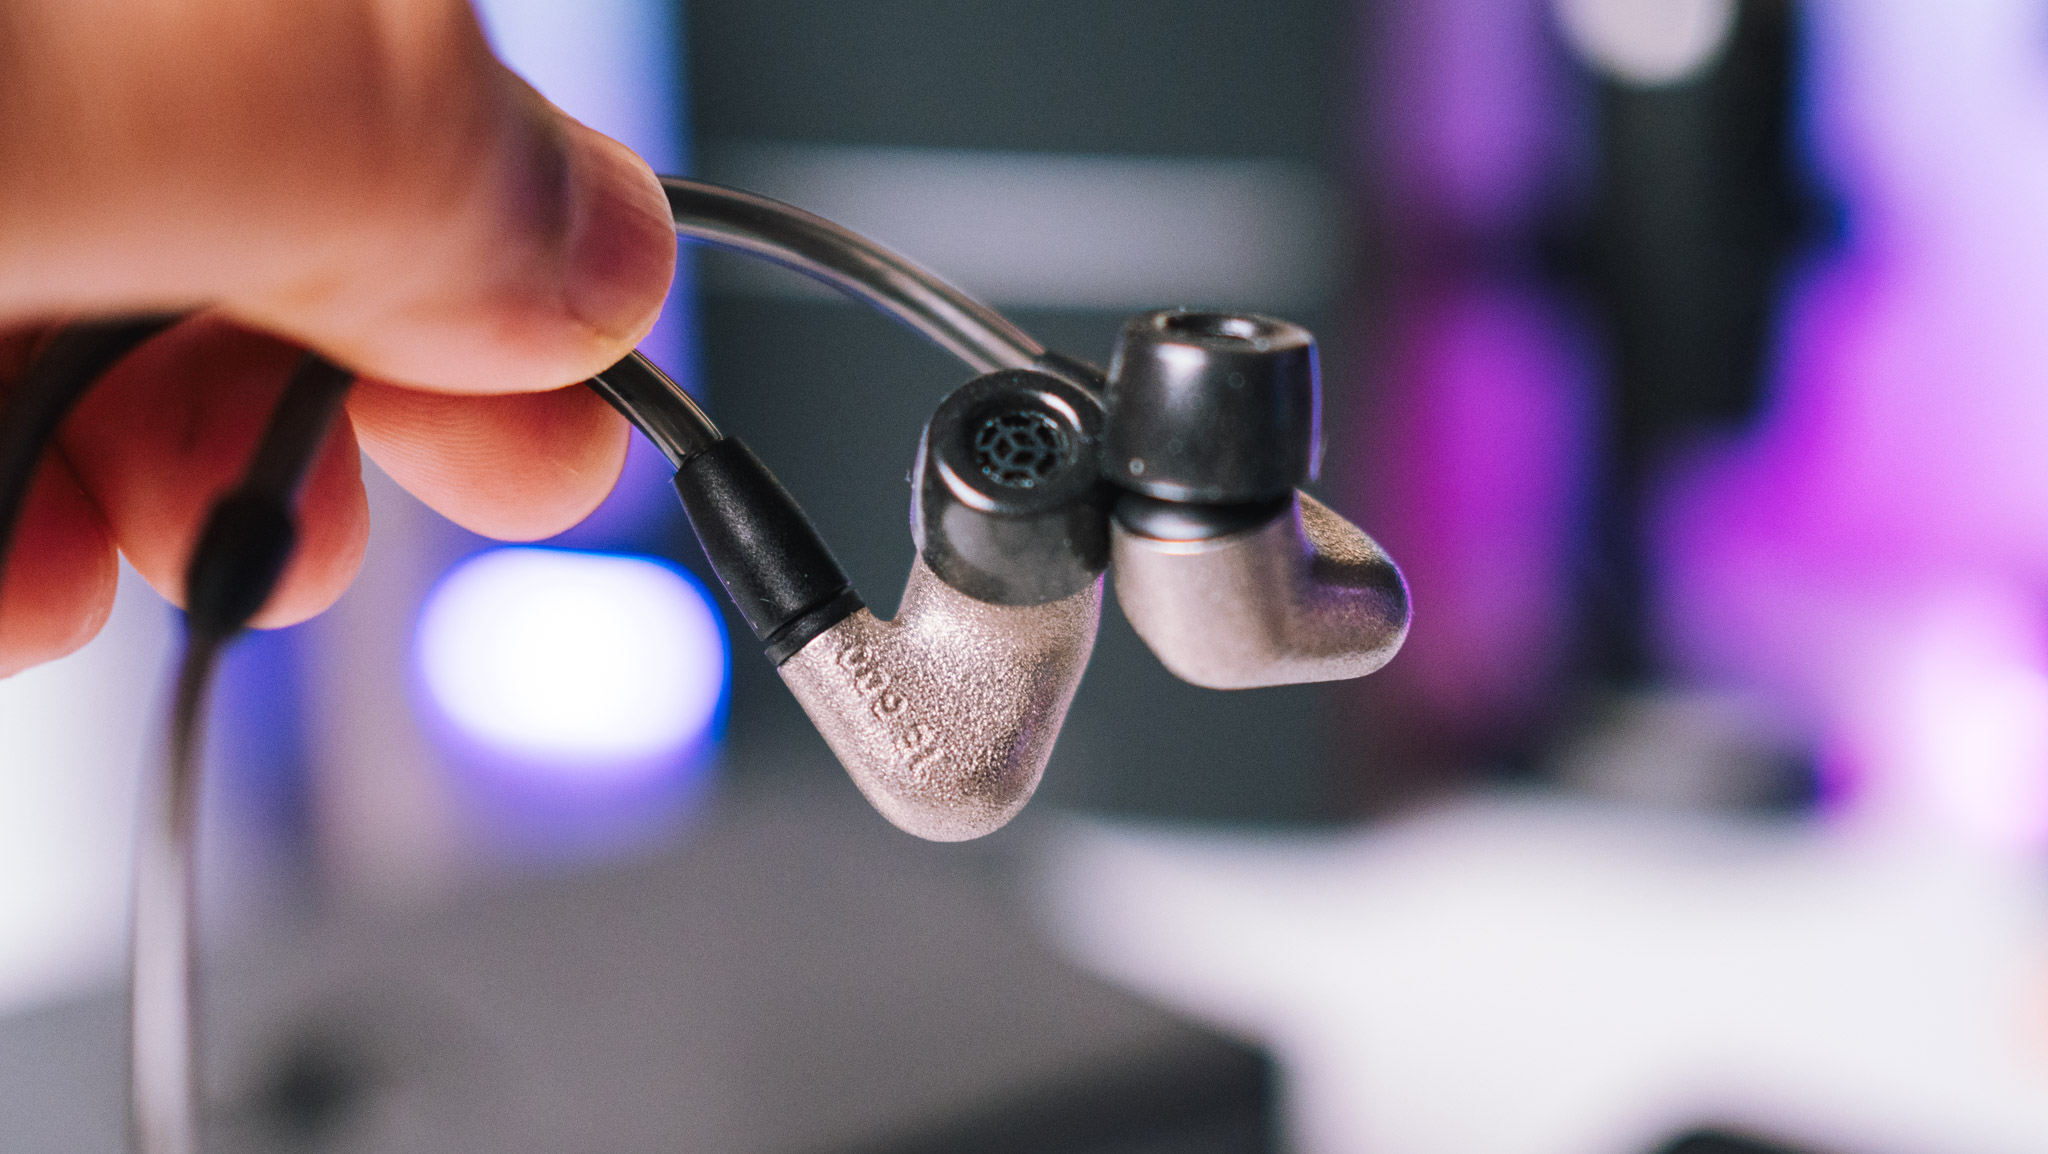 In-hand view of the Sennheiser IE600 with the connector